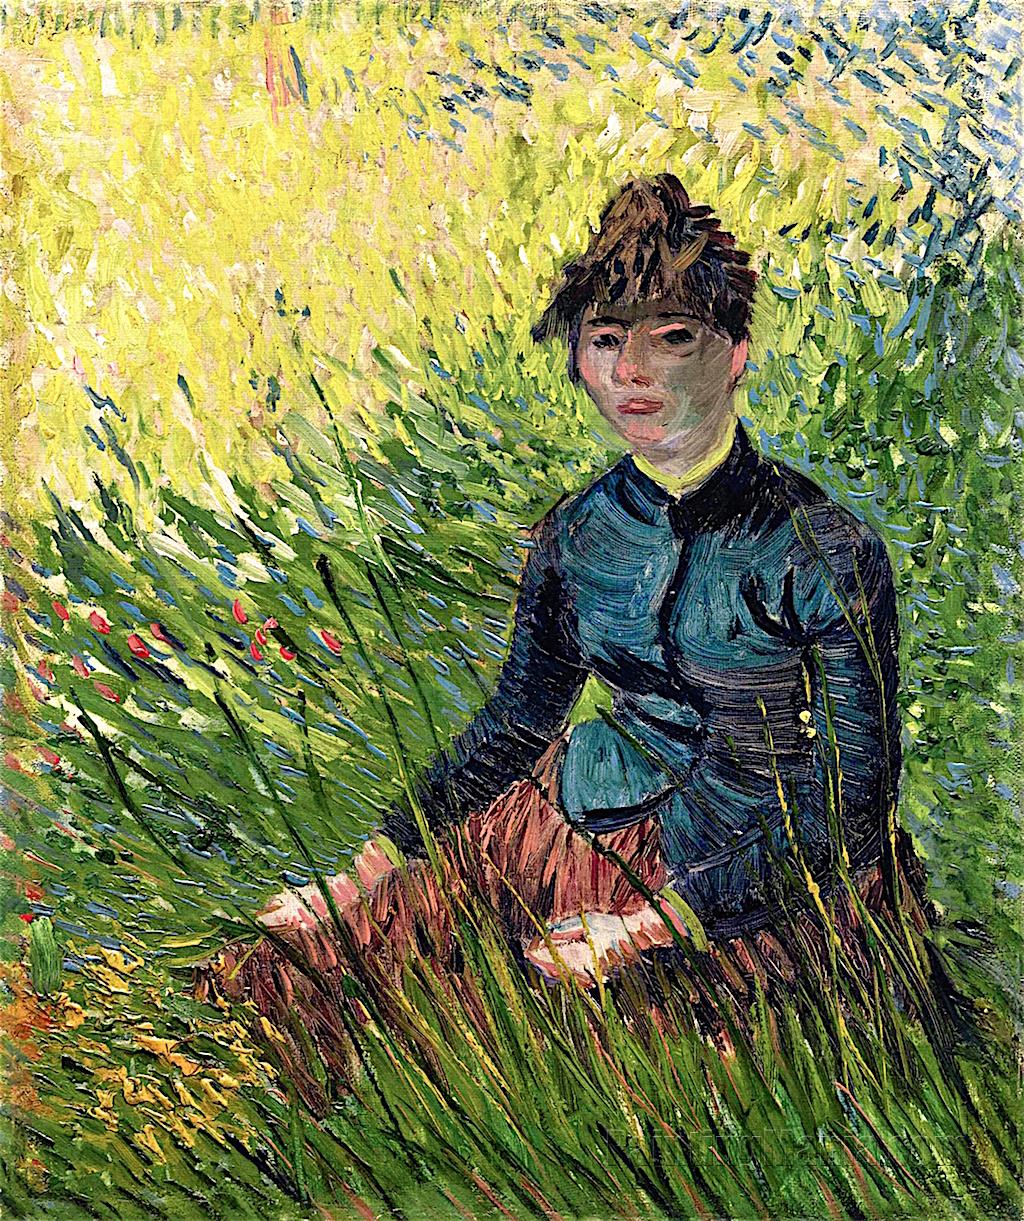 Woman Sitting in the Grass (Woman in a Field of Wheat)